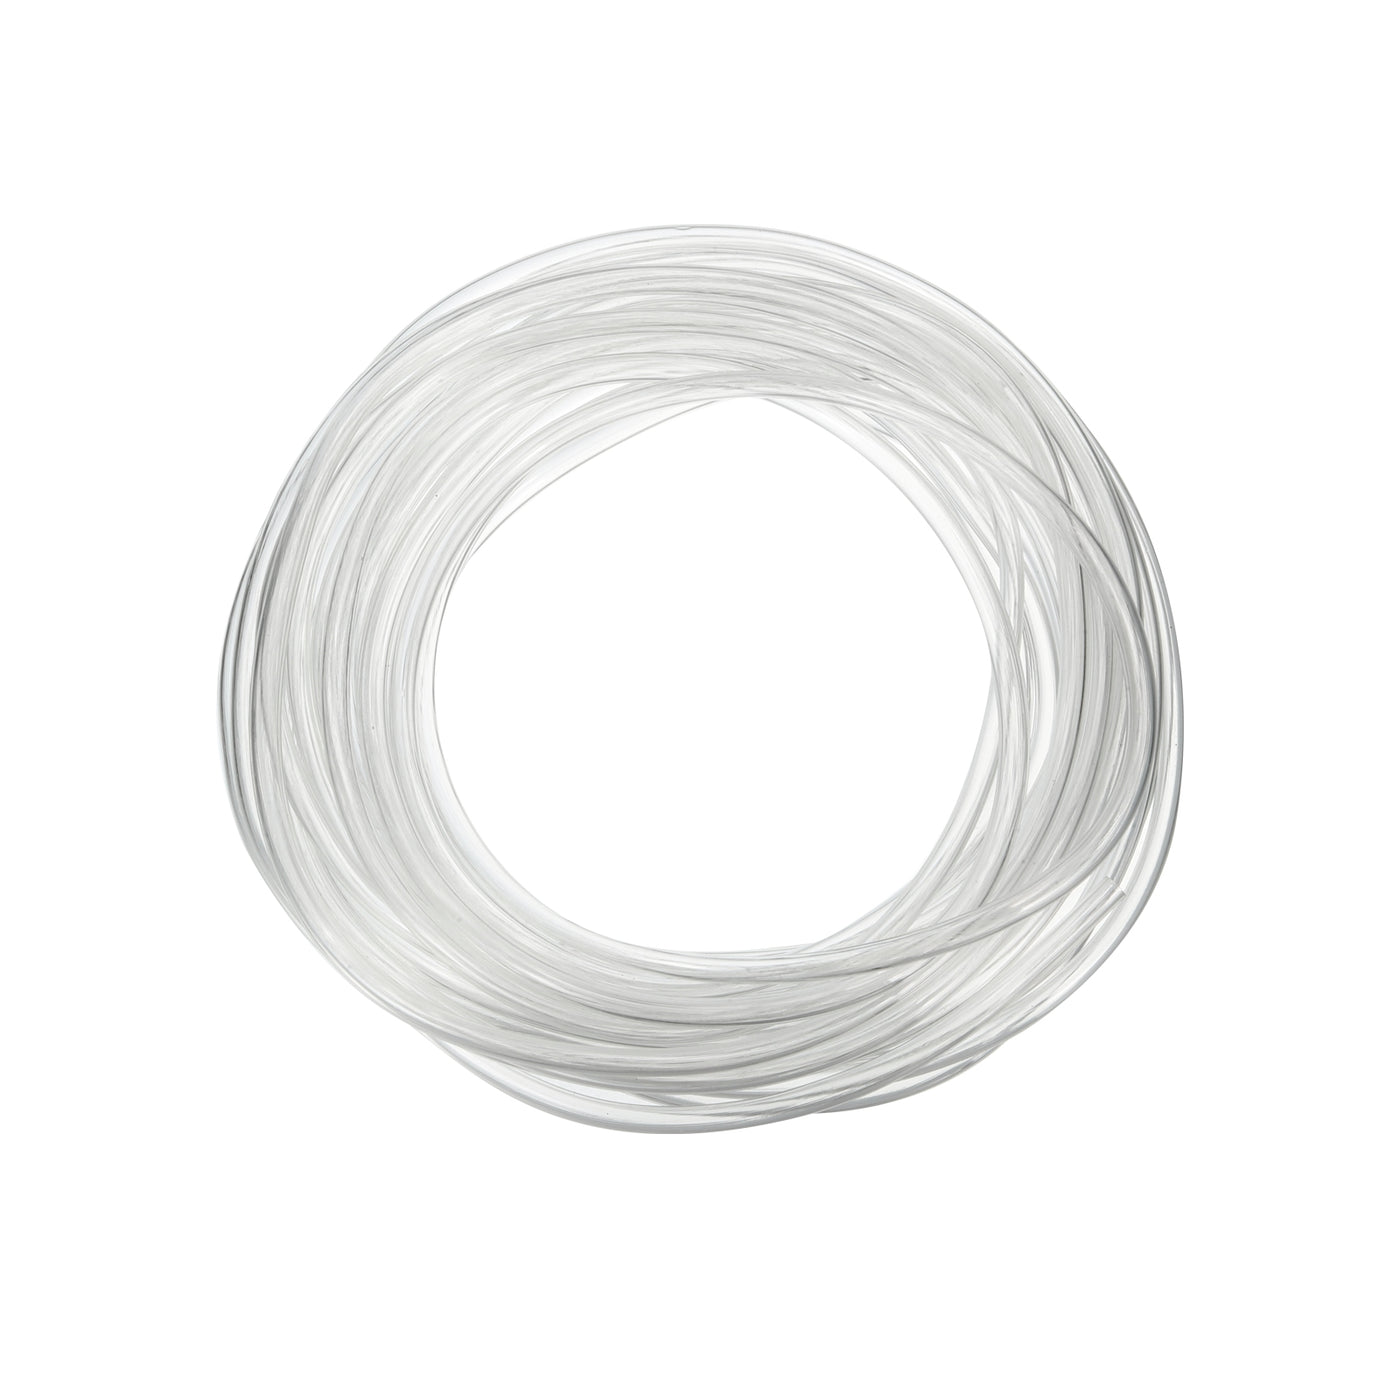 uxcell Uxcell Clear PVC Tube Wire Harness Tubing, 2mm ID 23ft Sleeve for Wire Sheathing Wire Protection